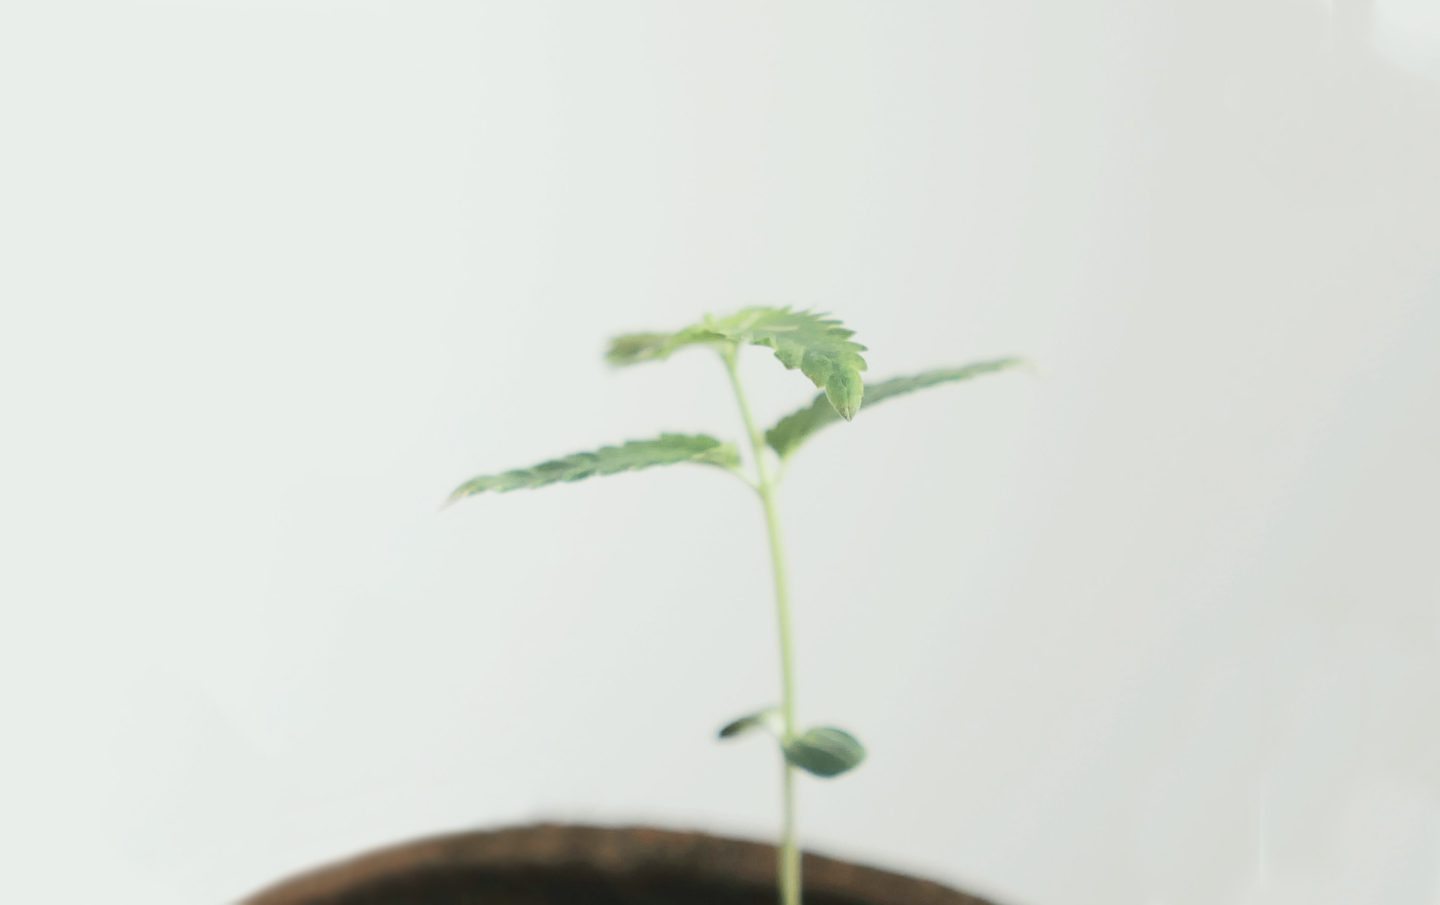 Growing cannabis from seed to seedling to vegetation to flowering. The essentials beginners need to know.